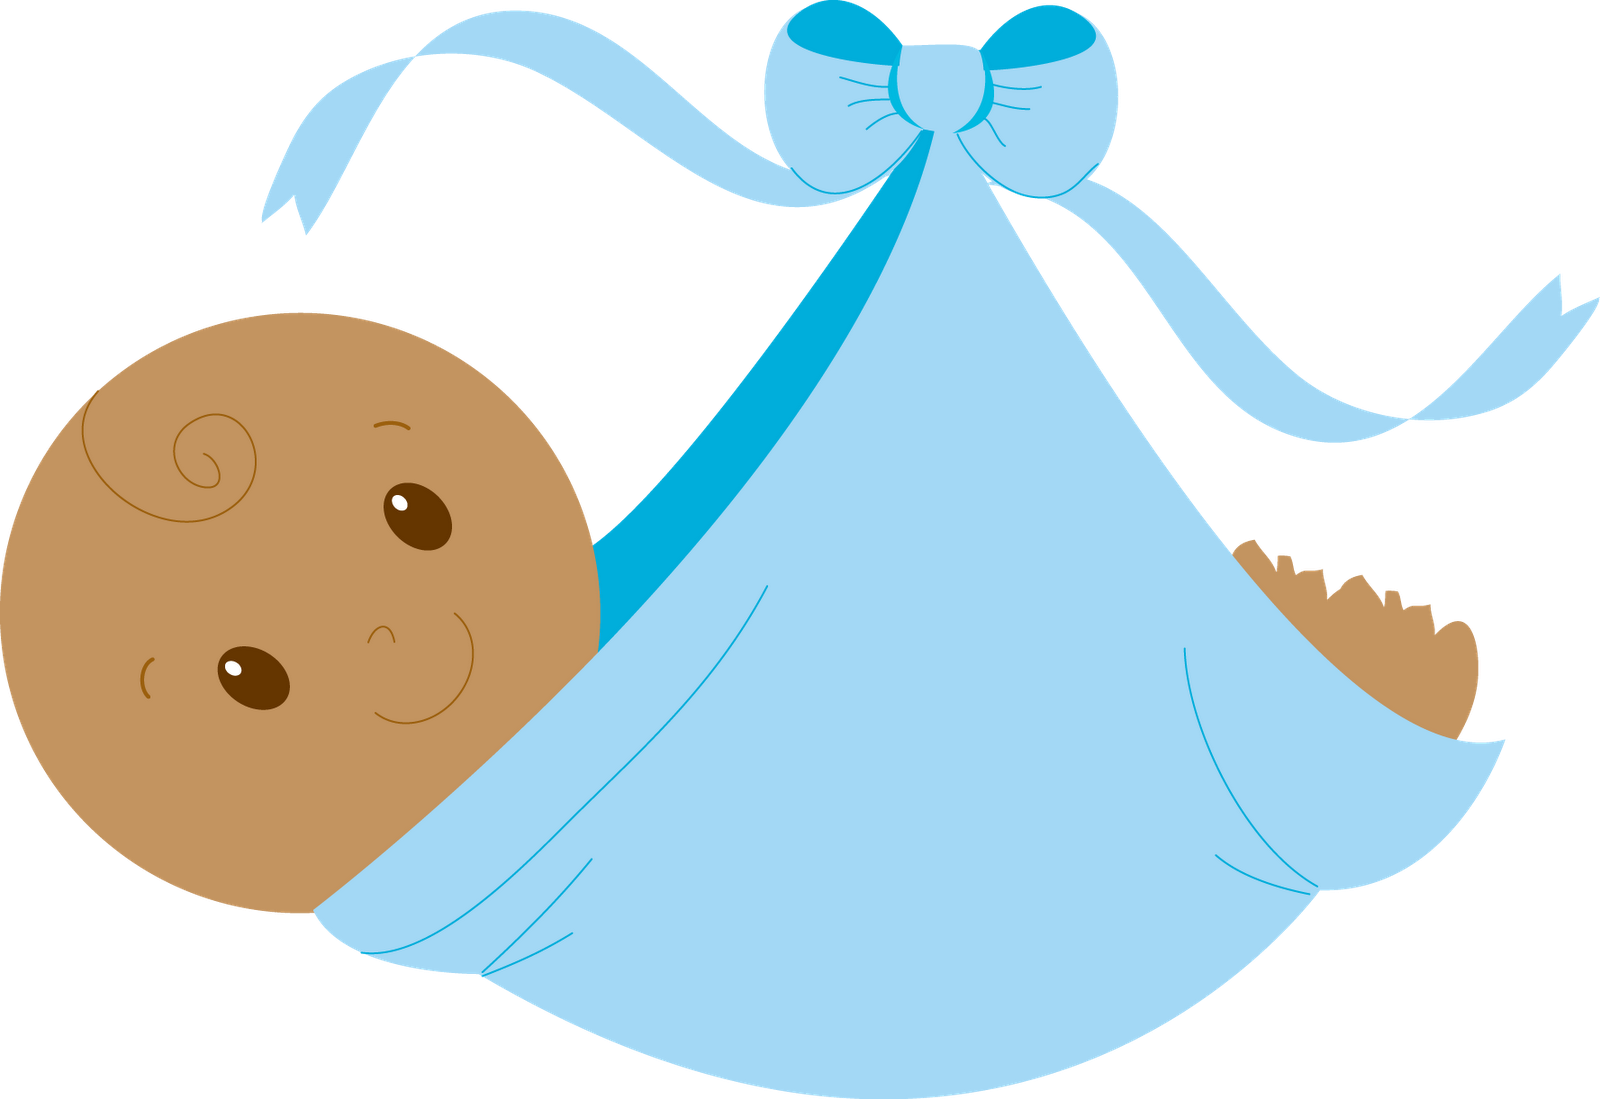 Pin by marina on. Twins clipart baby bundle